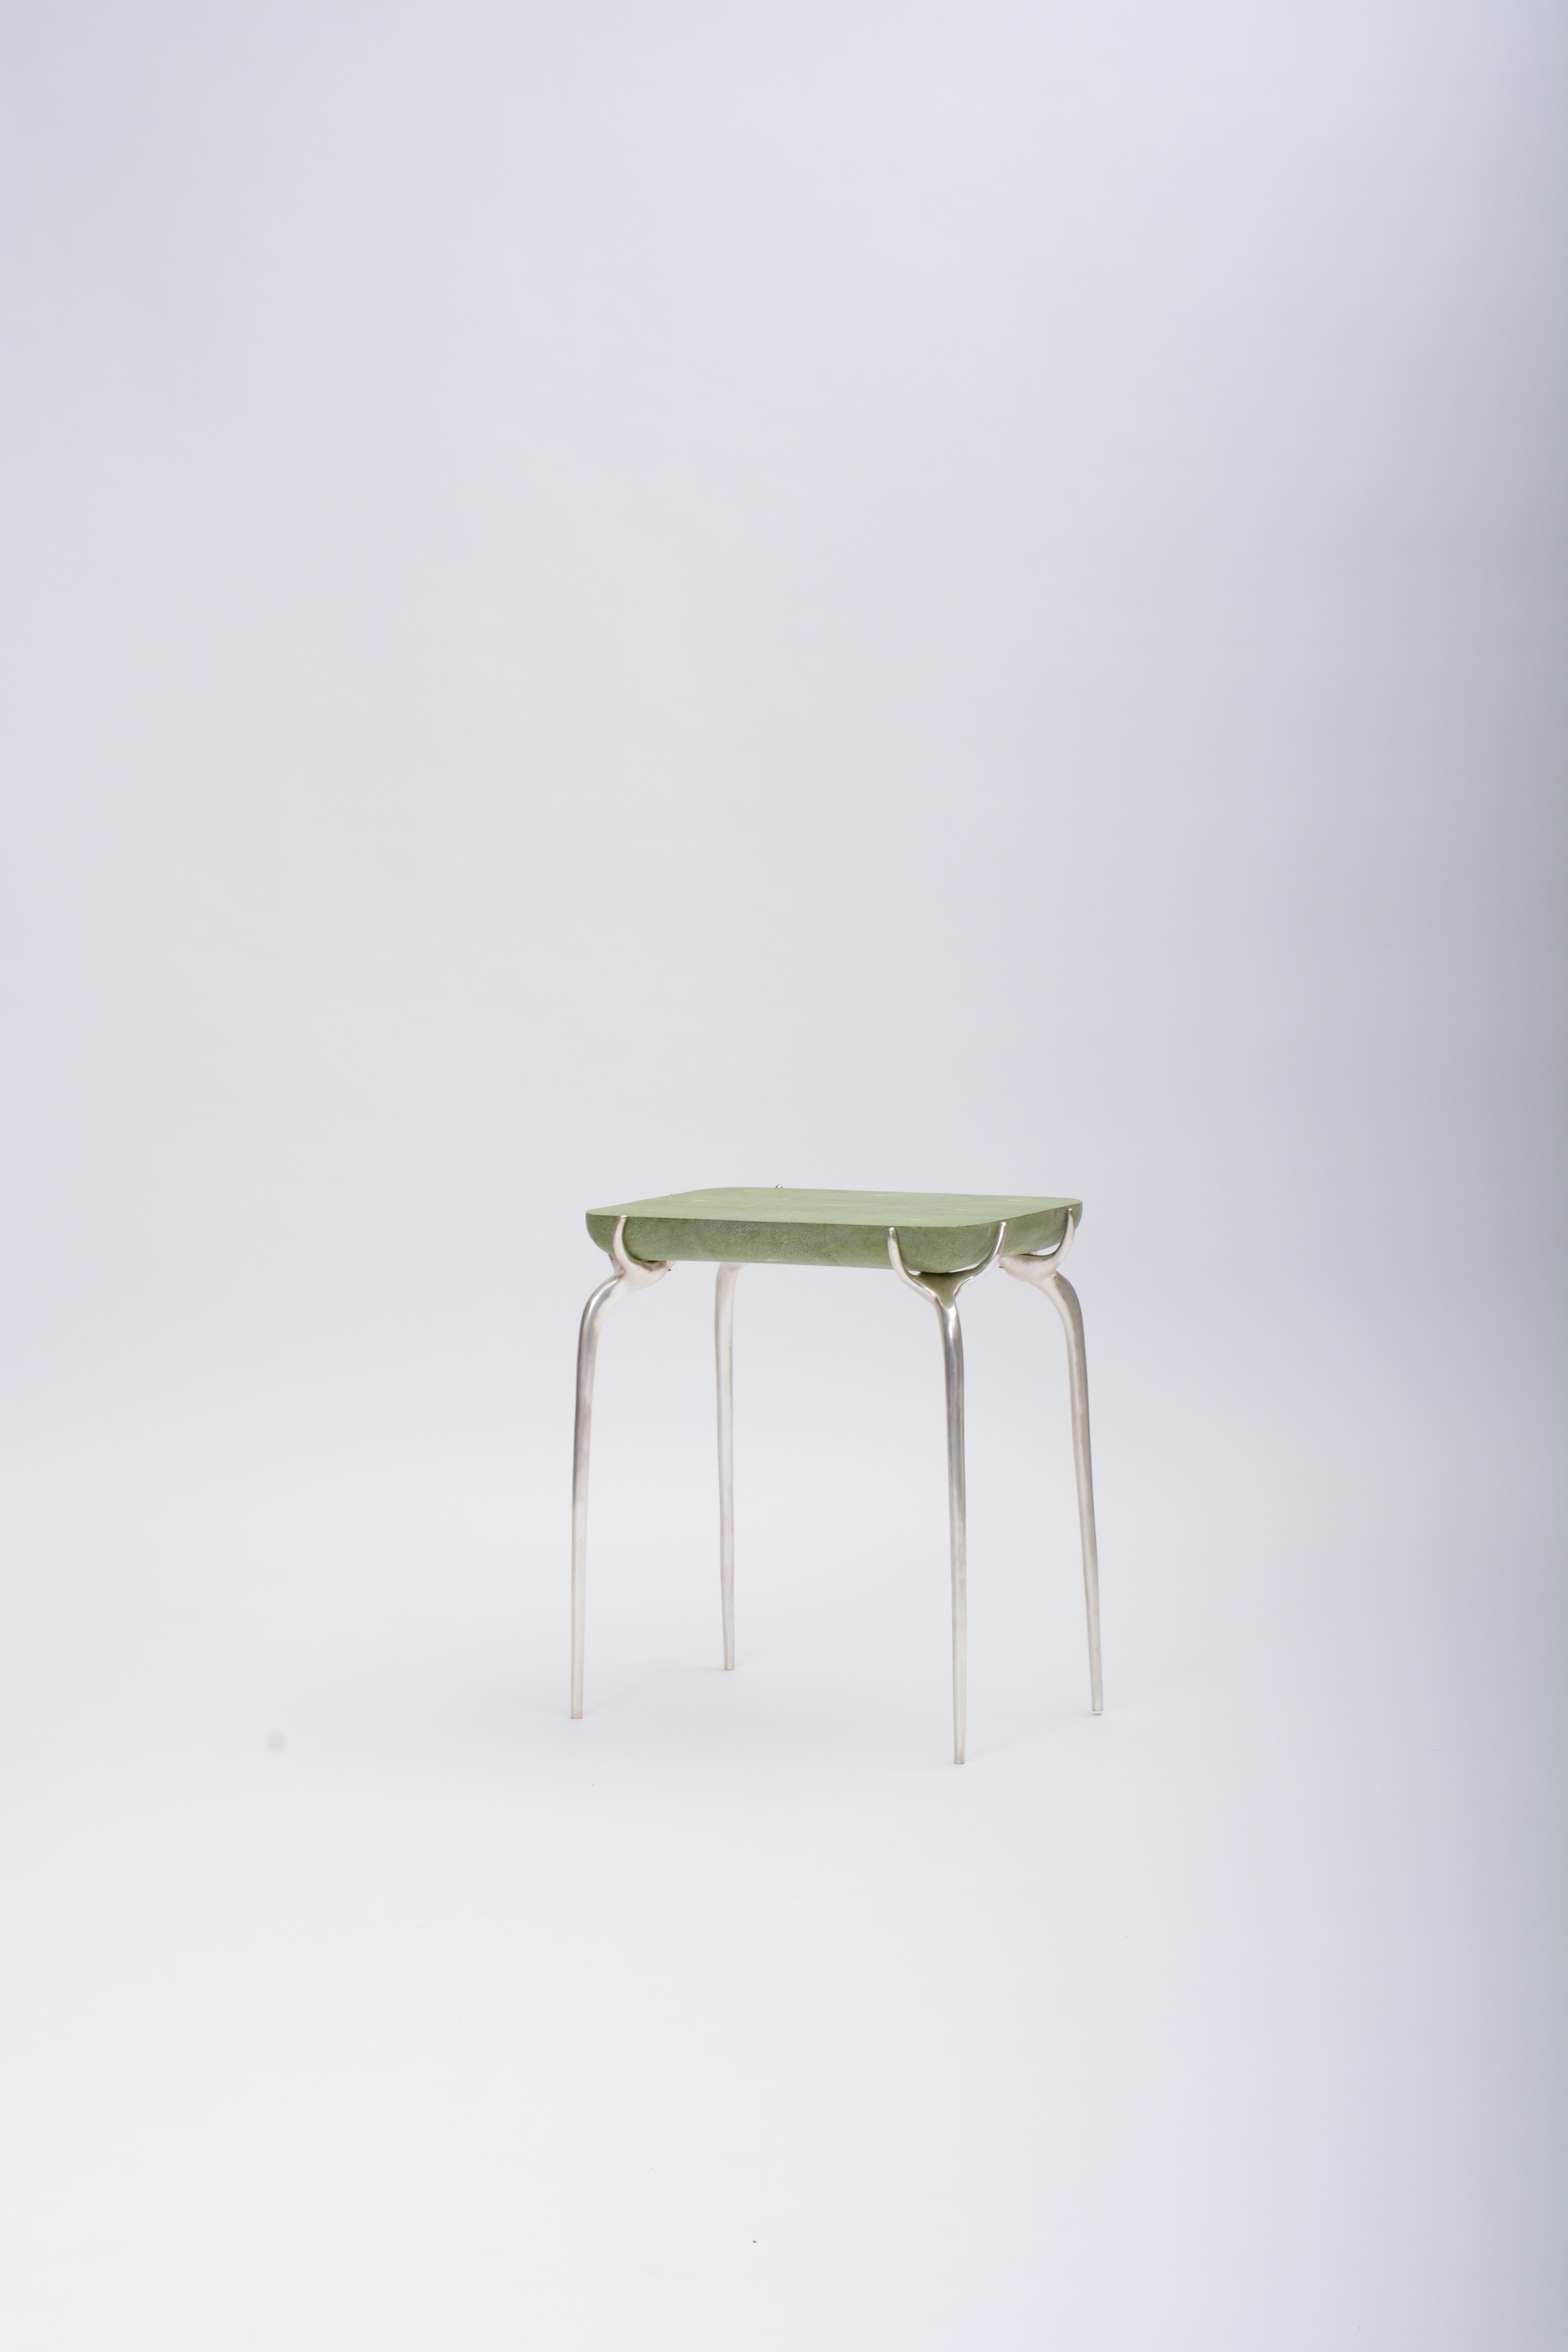 Jewel Side Table with Bronze, Silver Leaf, and Green Shagreen by Elan Atelier

The Jewel Side Table is inspired by a contemporary sculpture in mediums of wood, metal and stone. Our creative director references sculptors such as Louis Bourgeois as an